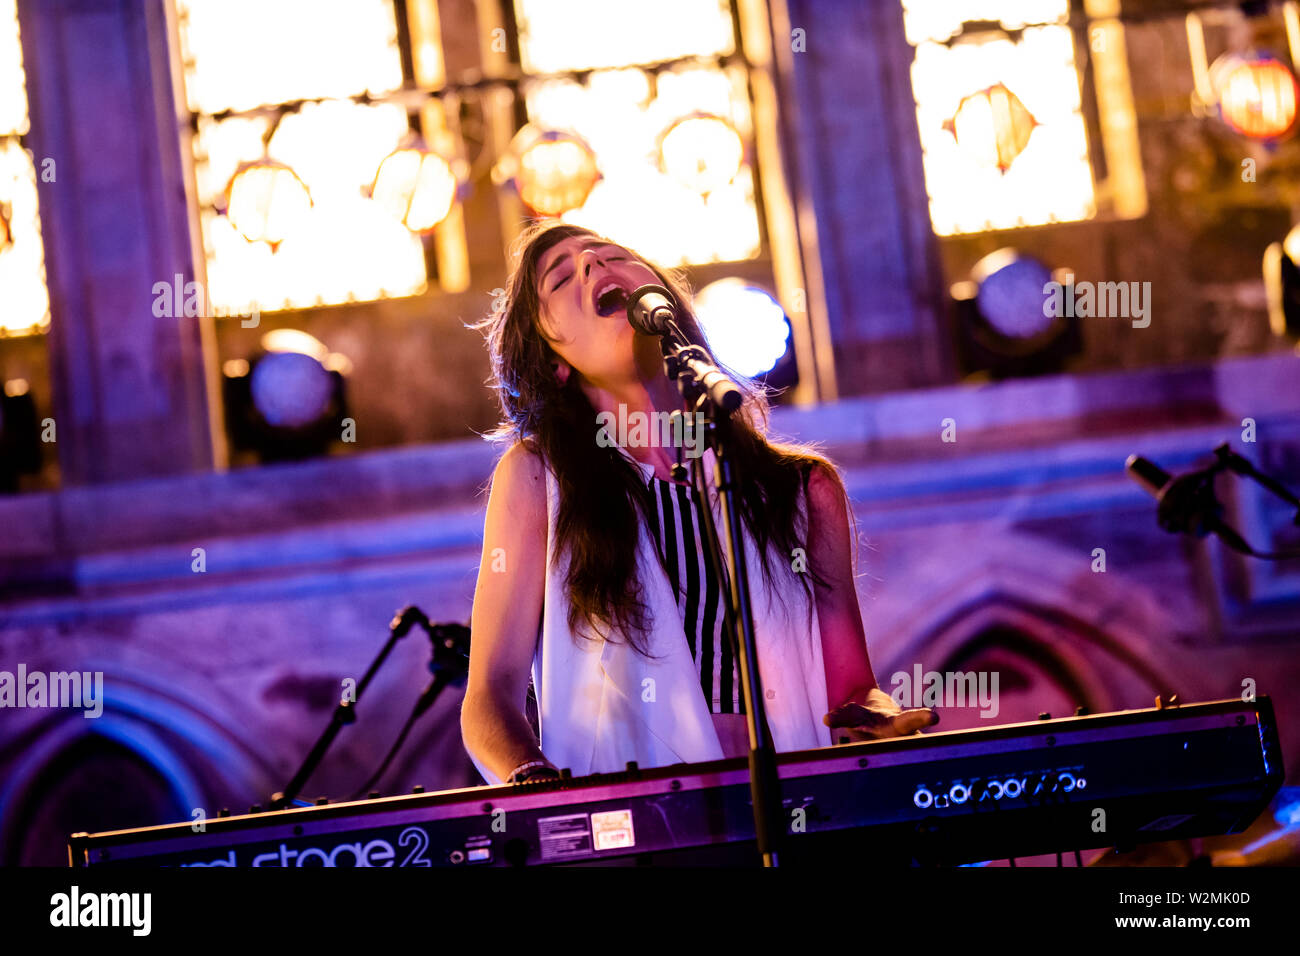 Bergen, Norway - June 12th, 2019. The American singer, musician and composer Julia Holter performs a live concert at during the Norwegian music festival Bergenfest 2019 in Bergen. (Photo credit: Gonzales Photo - Jarle H. Moe). Stock Photo